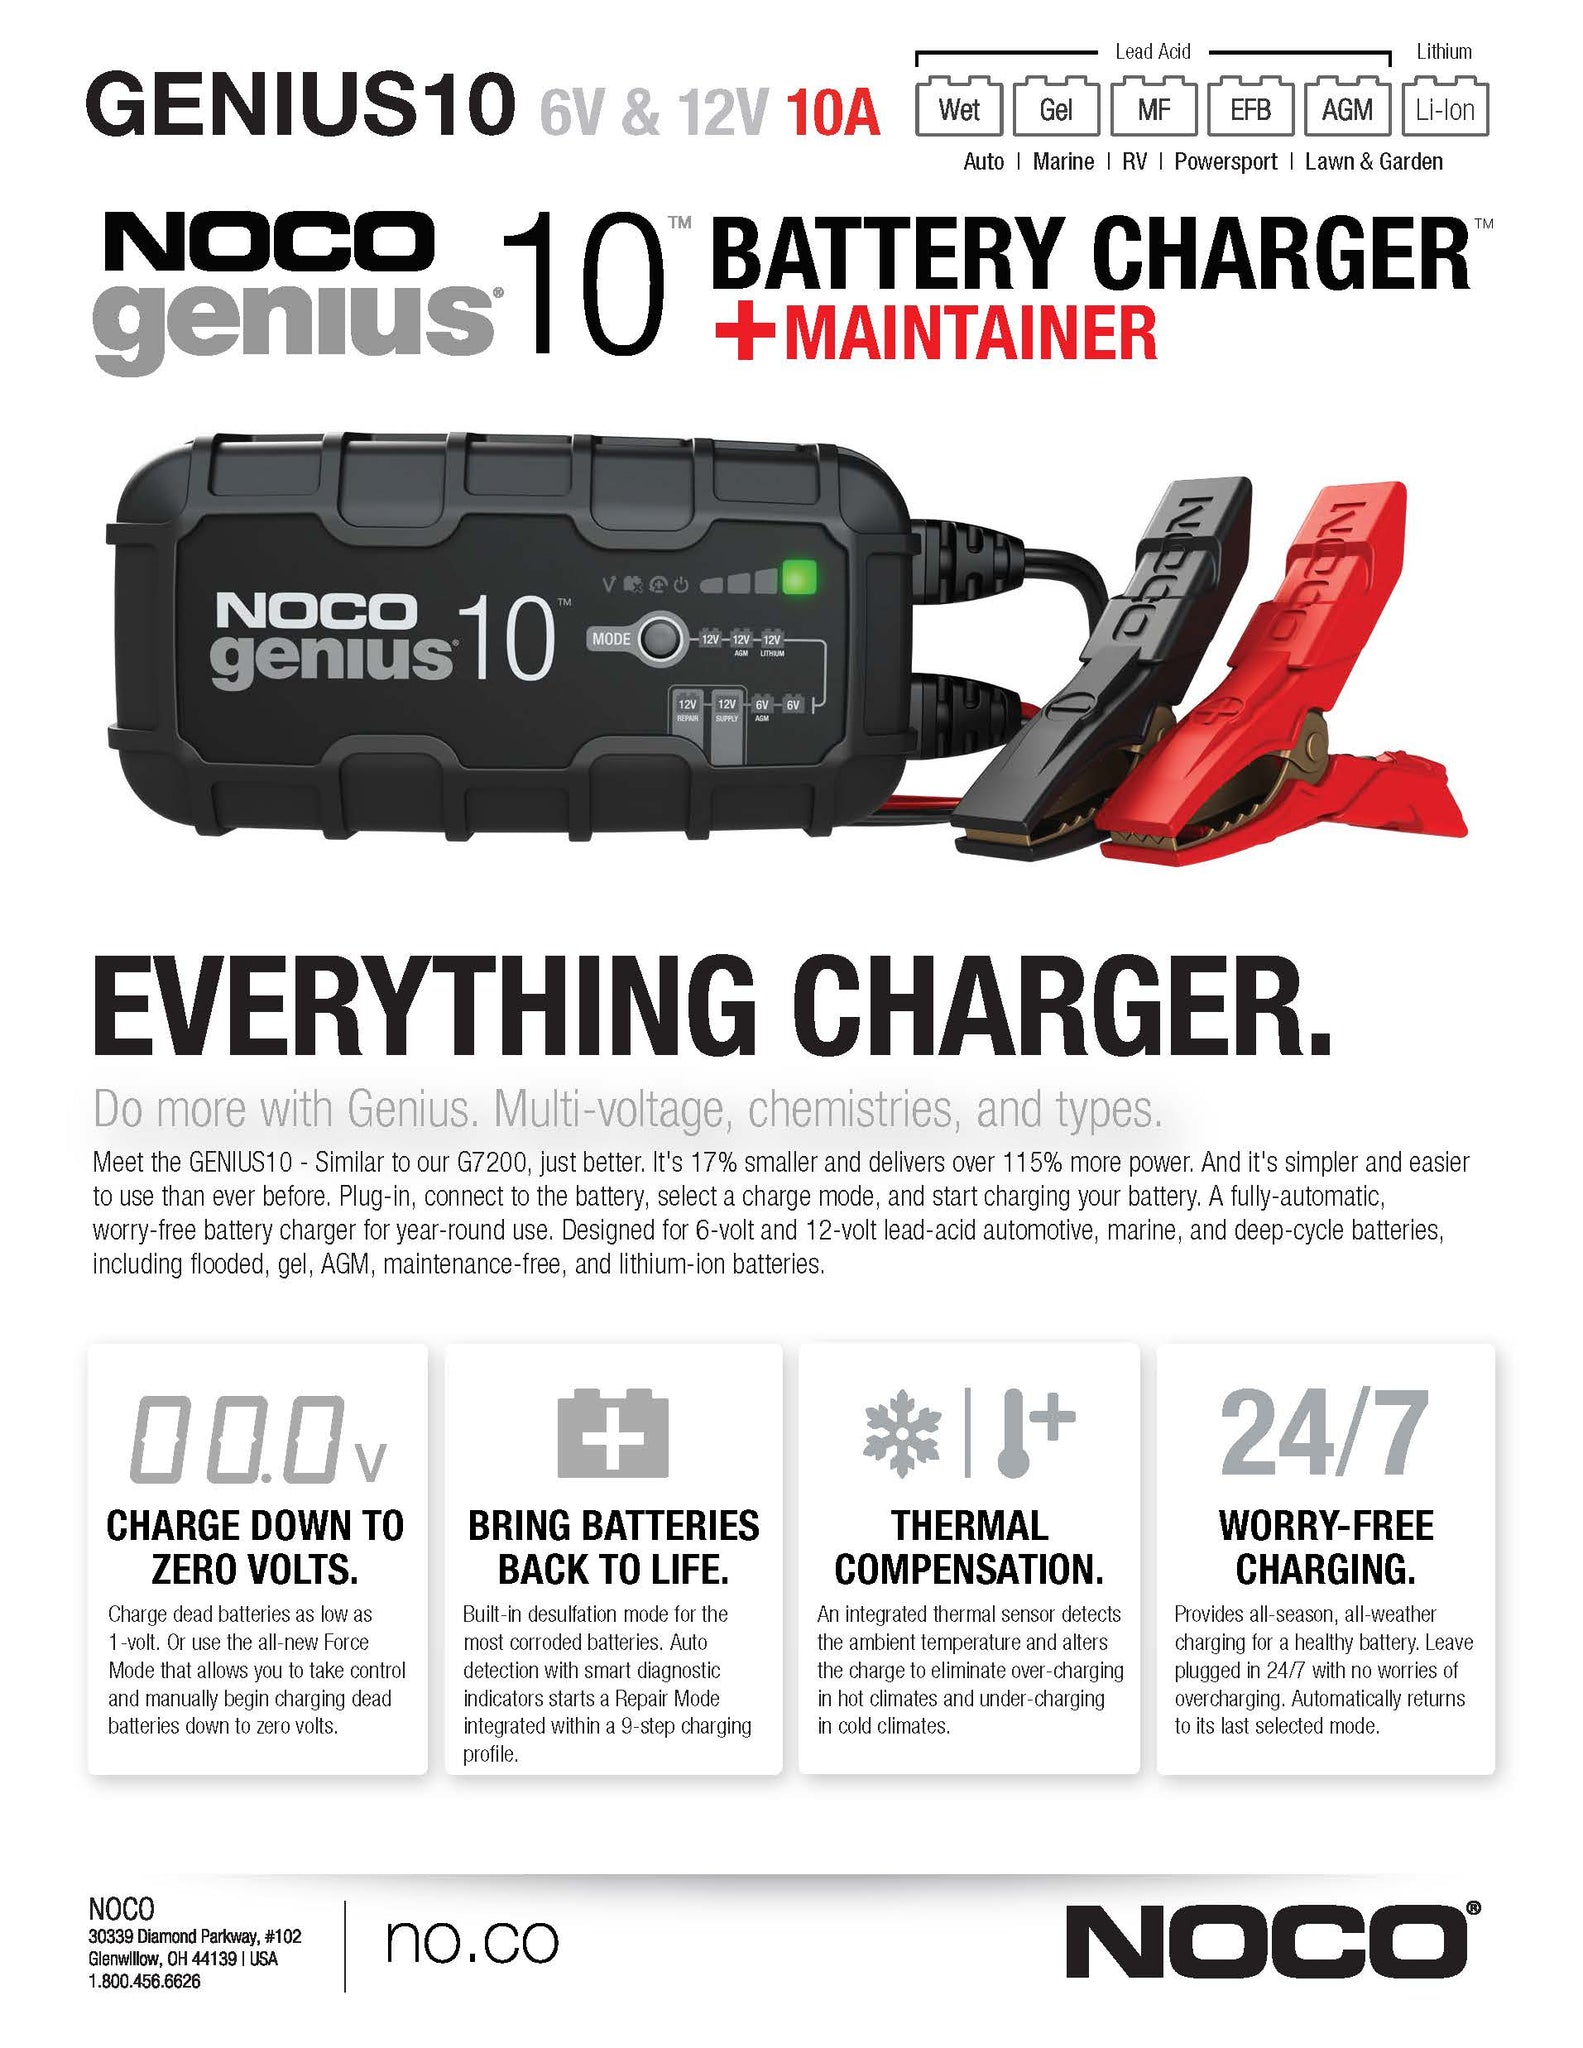 NOCO GENIUS10 6V/12V 10A Smart Battery Charger And